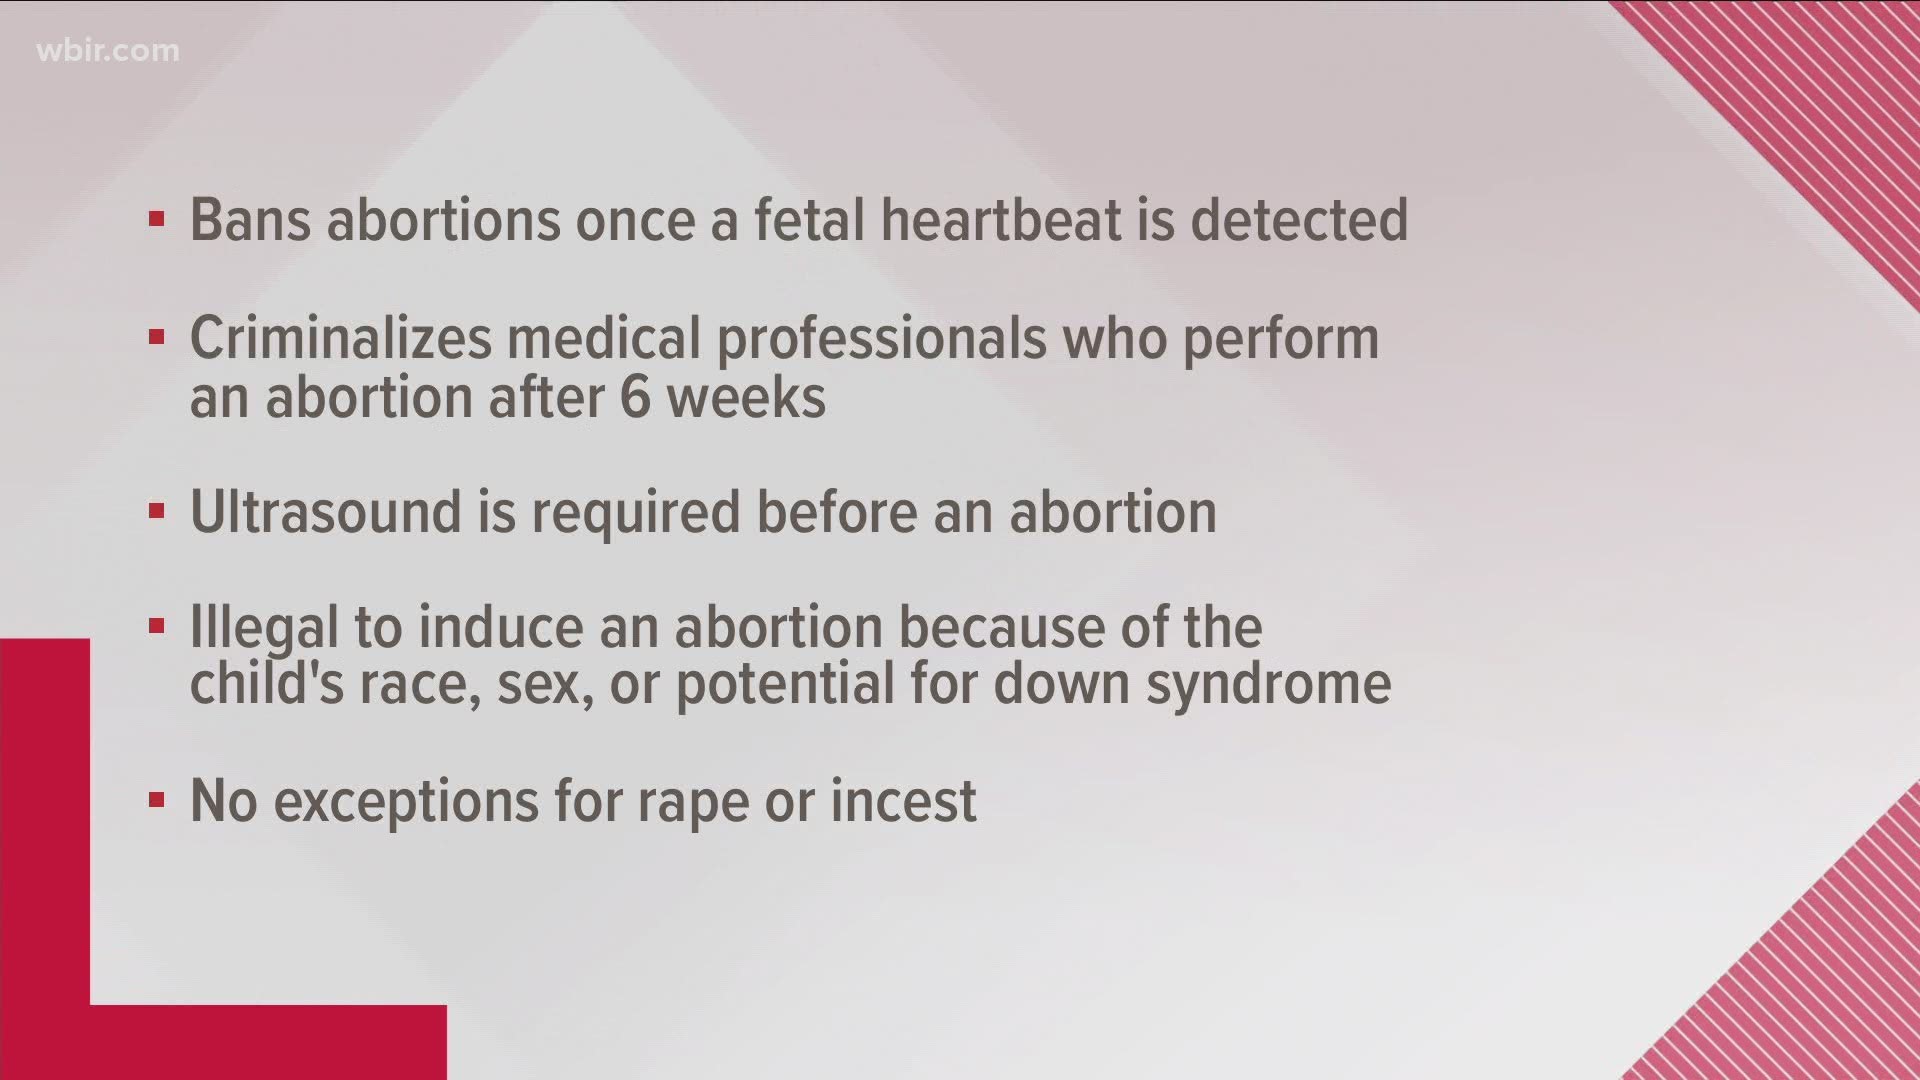 The legislation bans abortions once a fetal heartbeat is detected, which is as early as six weeks. It also criminalizes medical professionals who perform an abortion